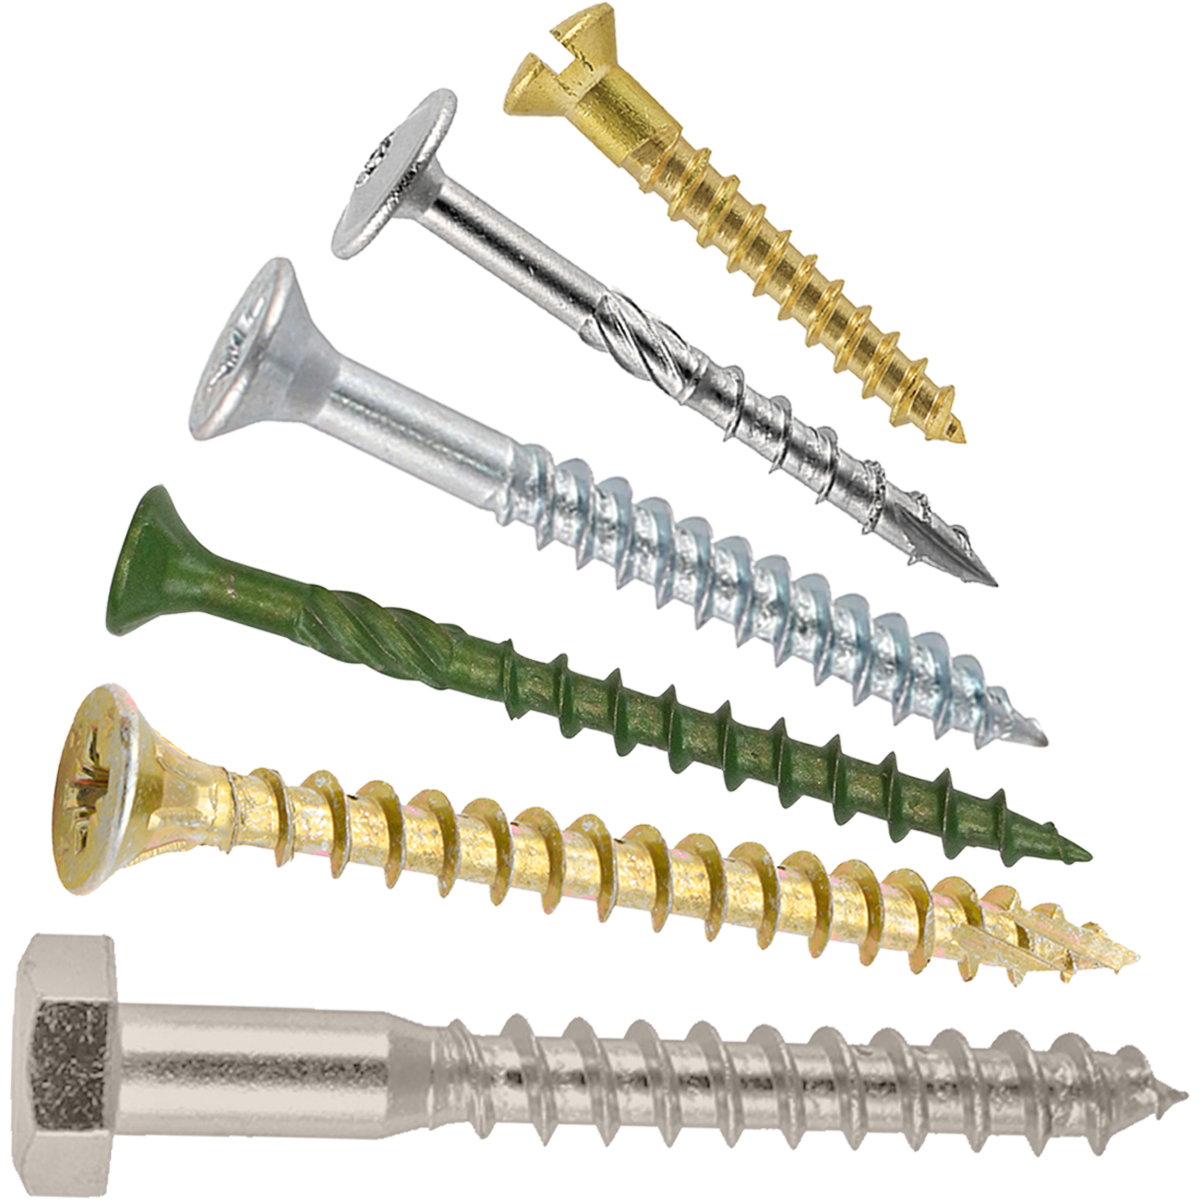 Wood and timber screws in various sizes, materials, threads and heads. A comprehensive rage with bulk discounts available.